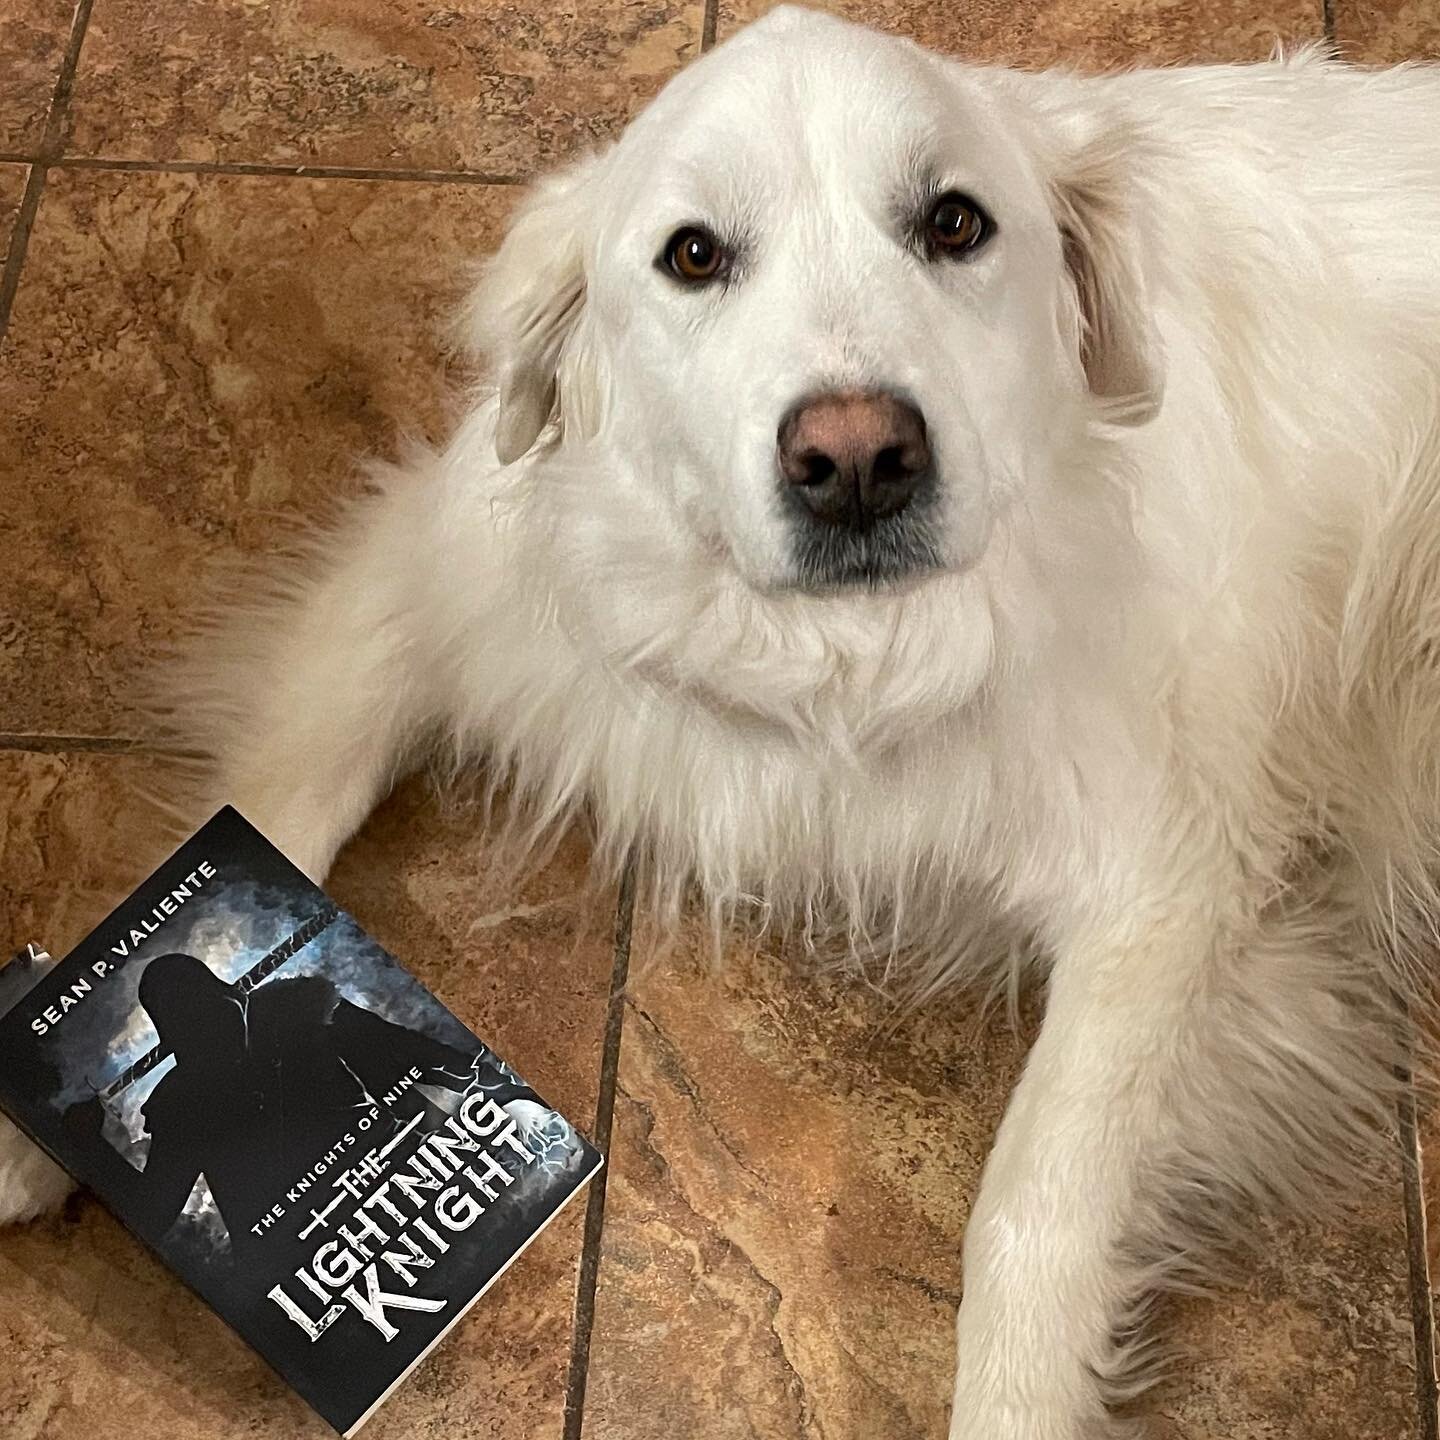 Snowbelle says it&rsquo;s time to curl up with a good book. 10/10 very good girls would recommend.